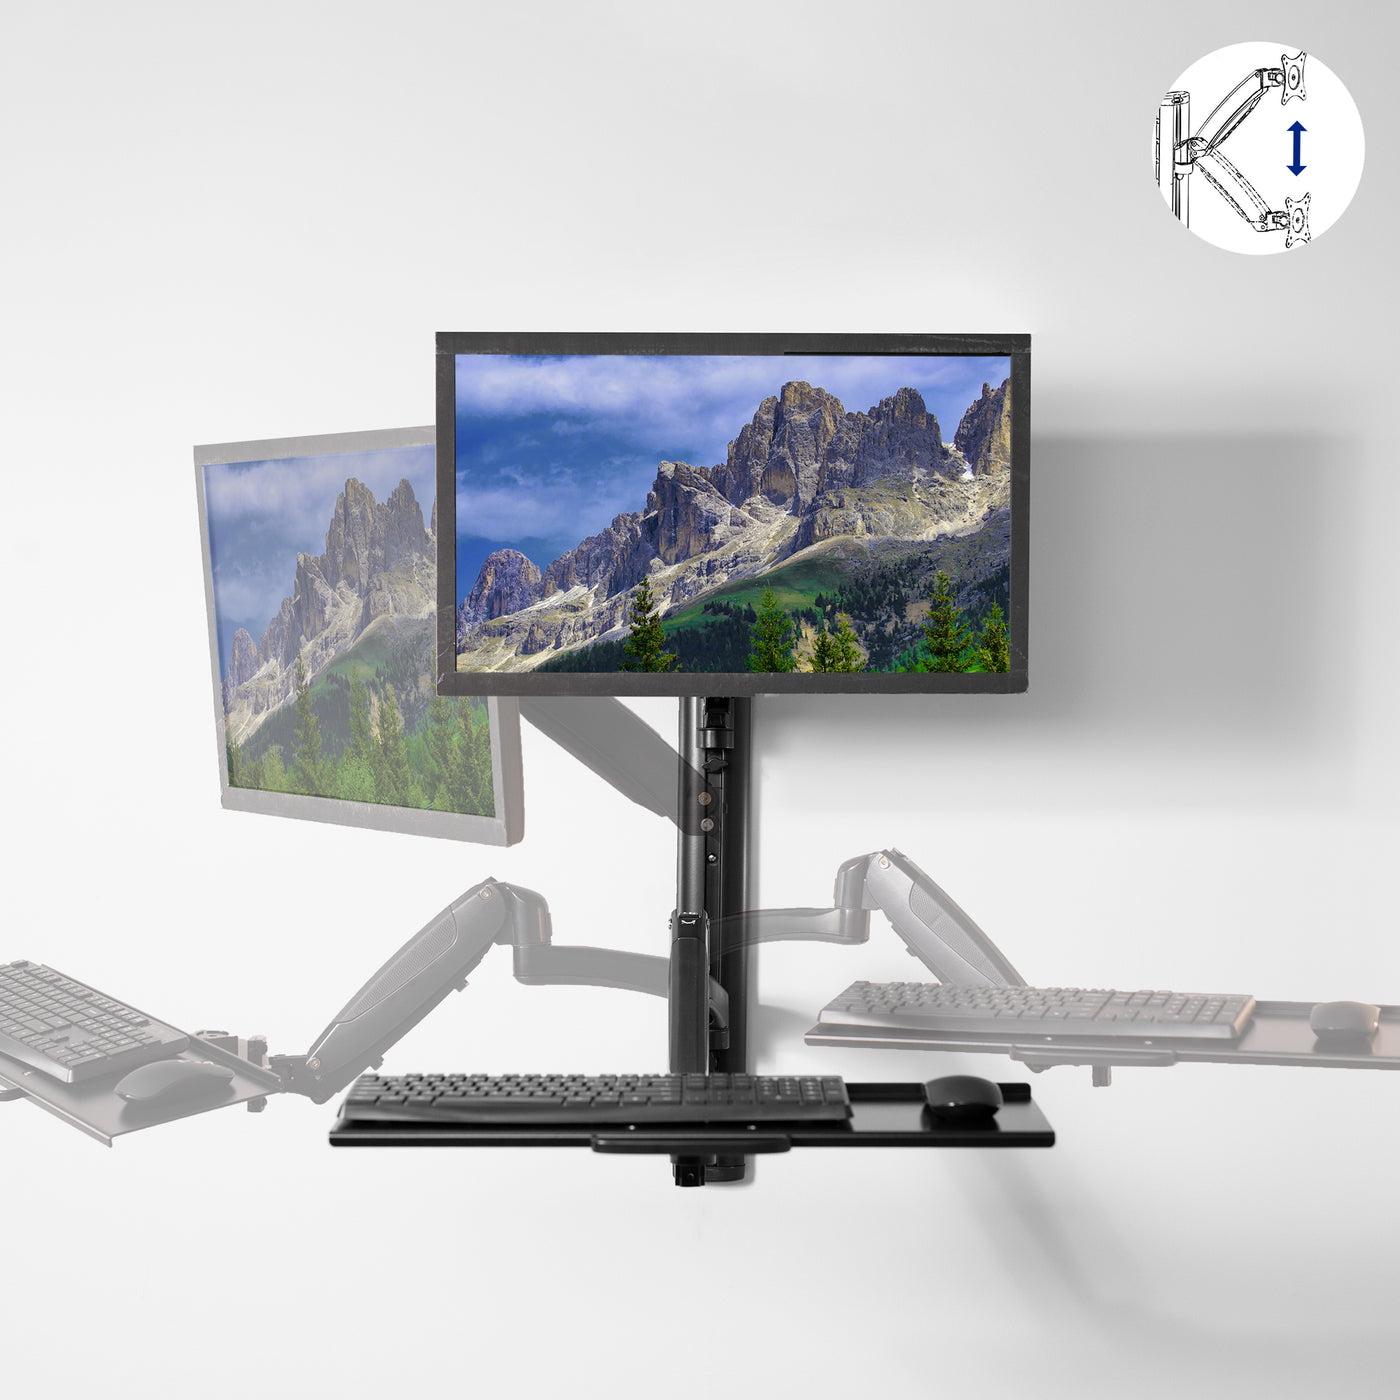 Fully articulating wall mount to attain the most comfortable typing and viewing angle.